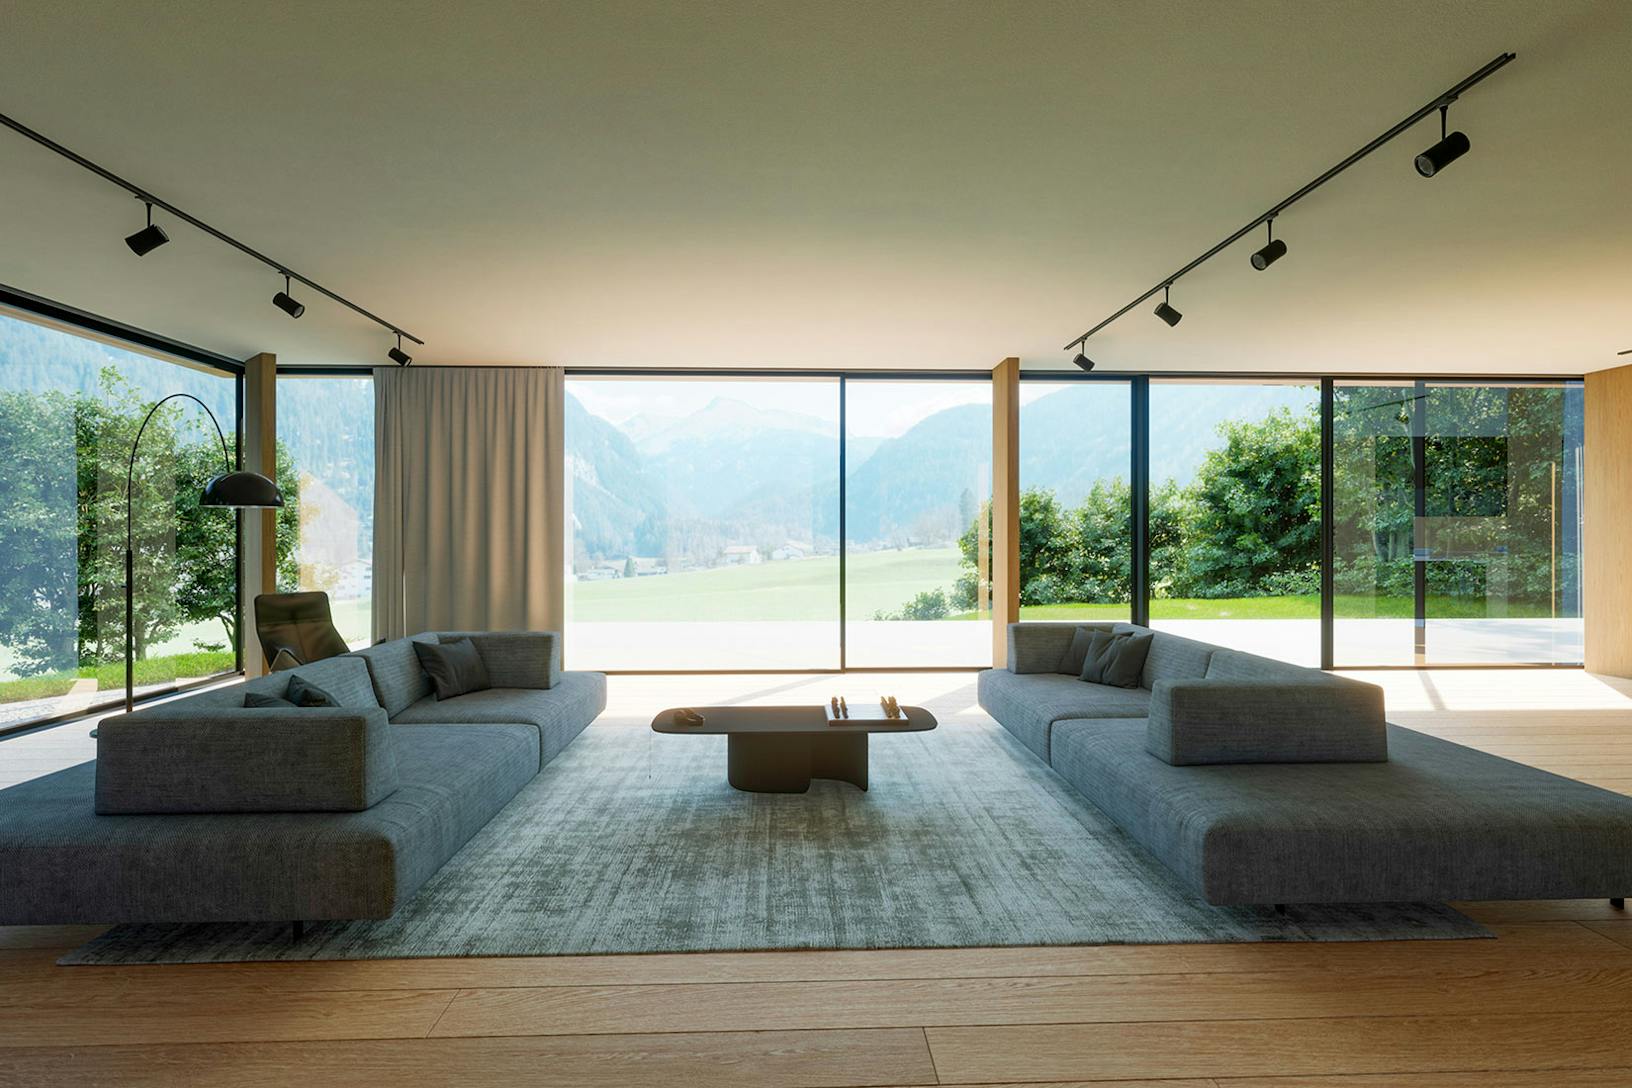 A contemporary living room with large panel sliding walls overlooking the mountains.